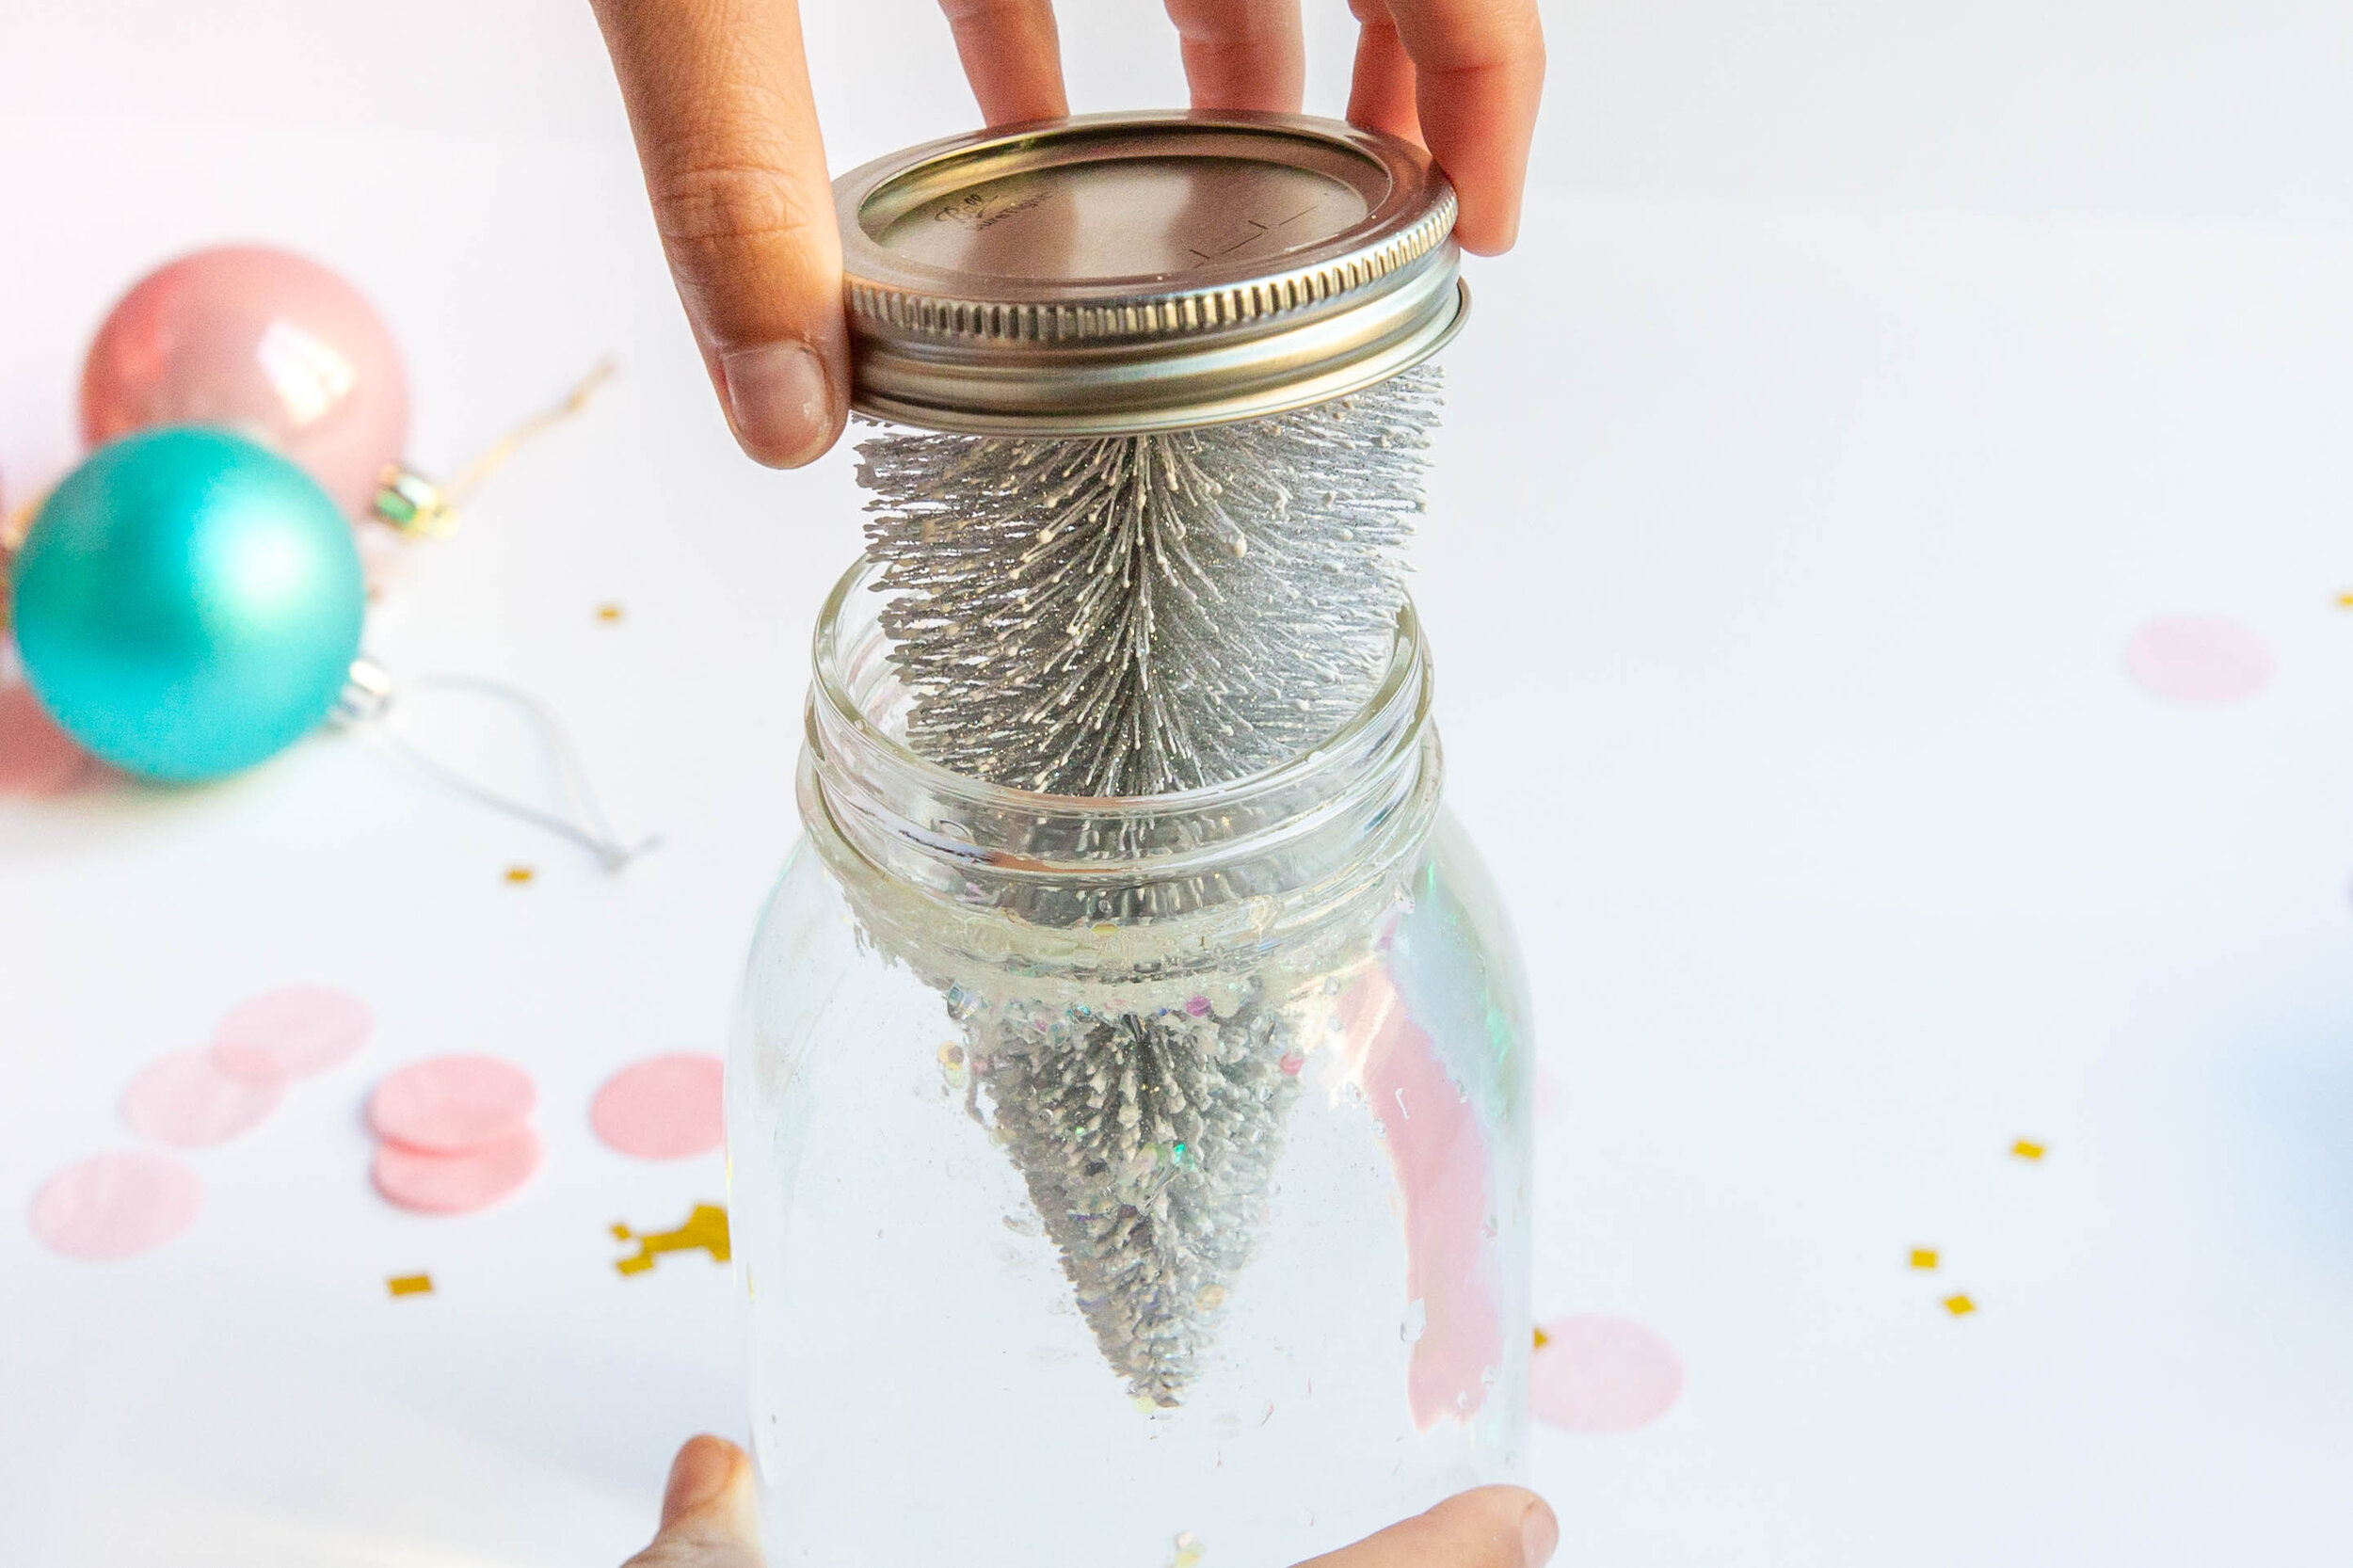 DIY Snow Globes (with Video) ⋆ Sugar, Spice and Glitter